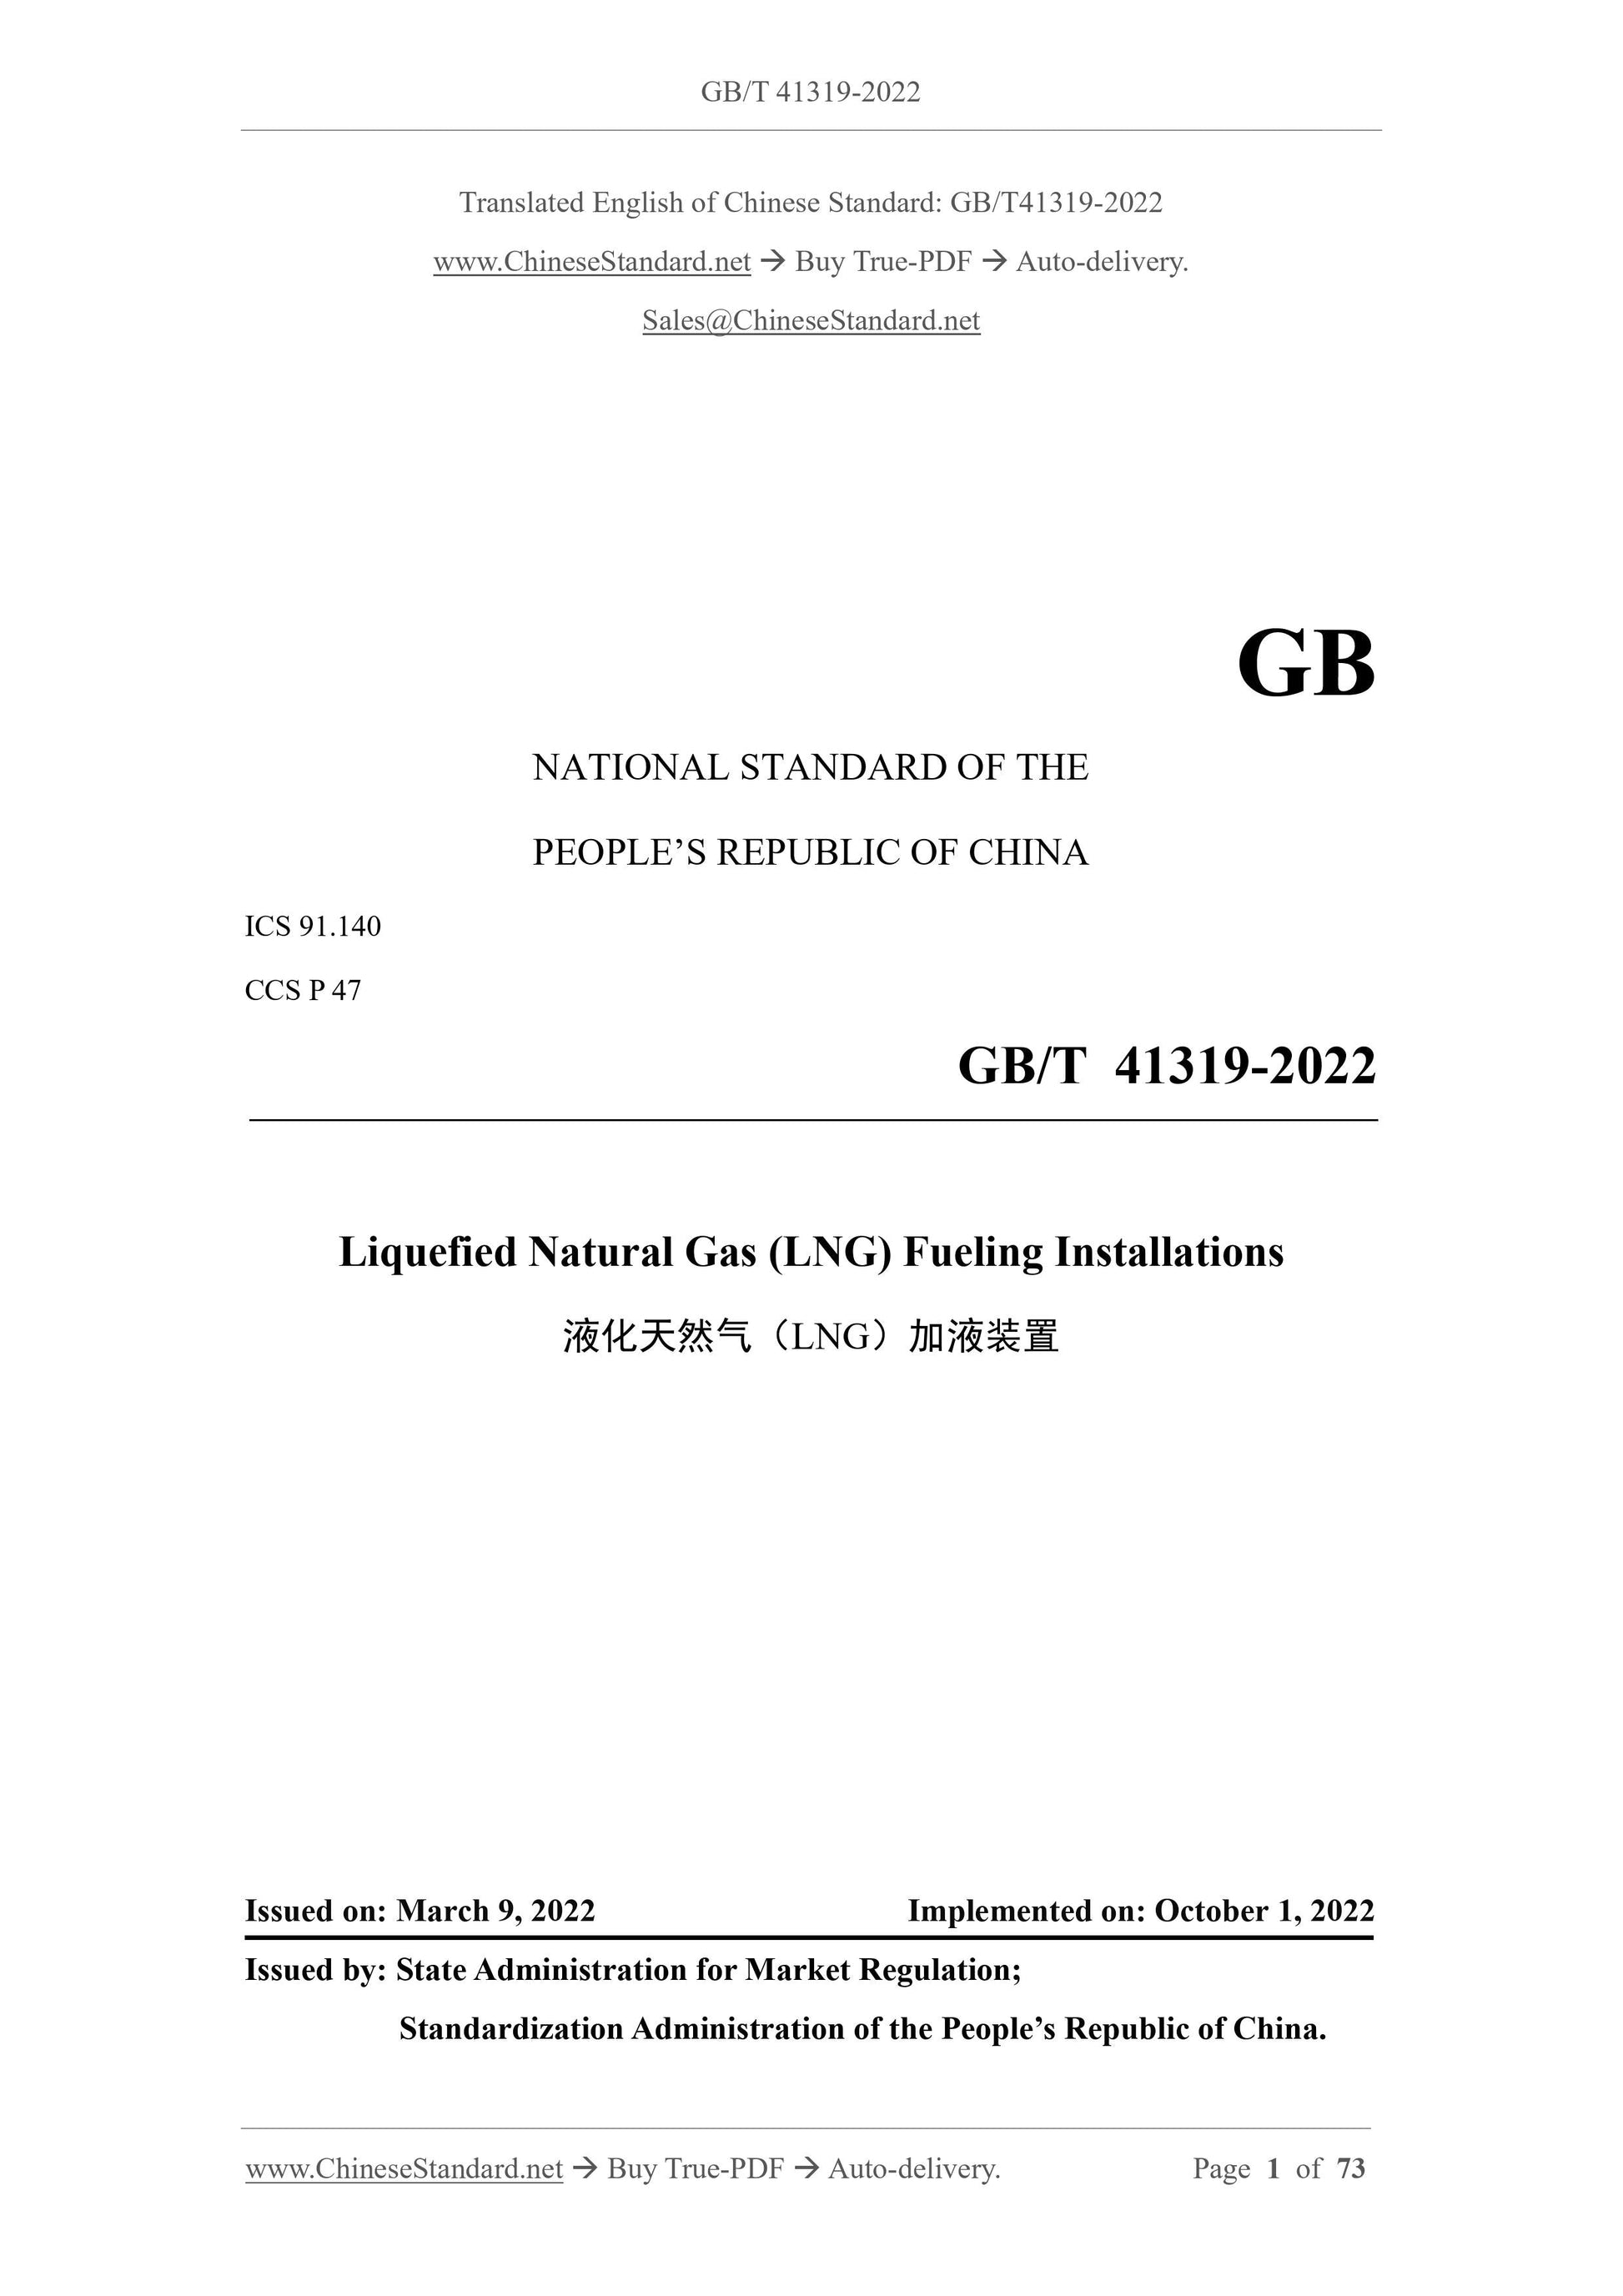 GB/T 41319-2022 Page 1